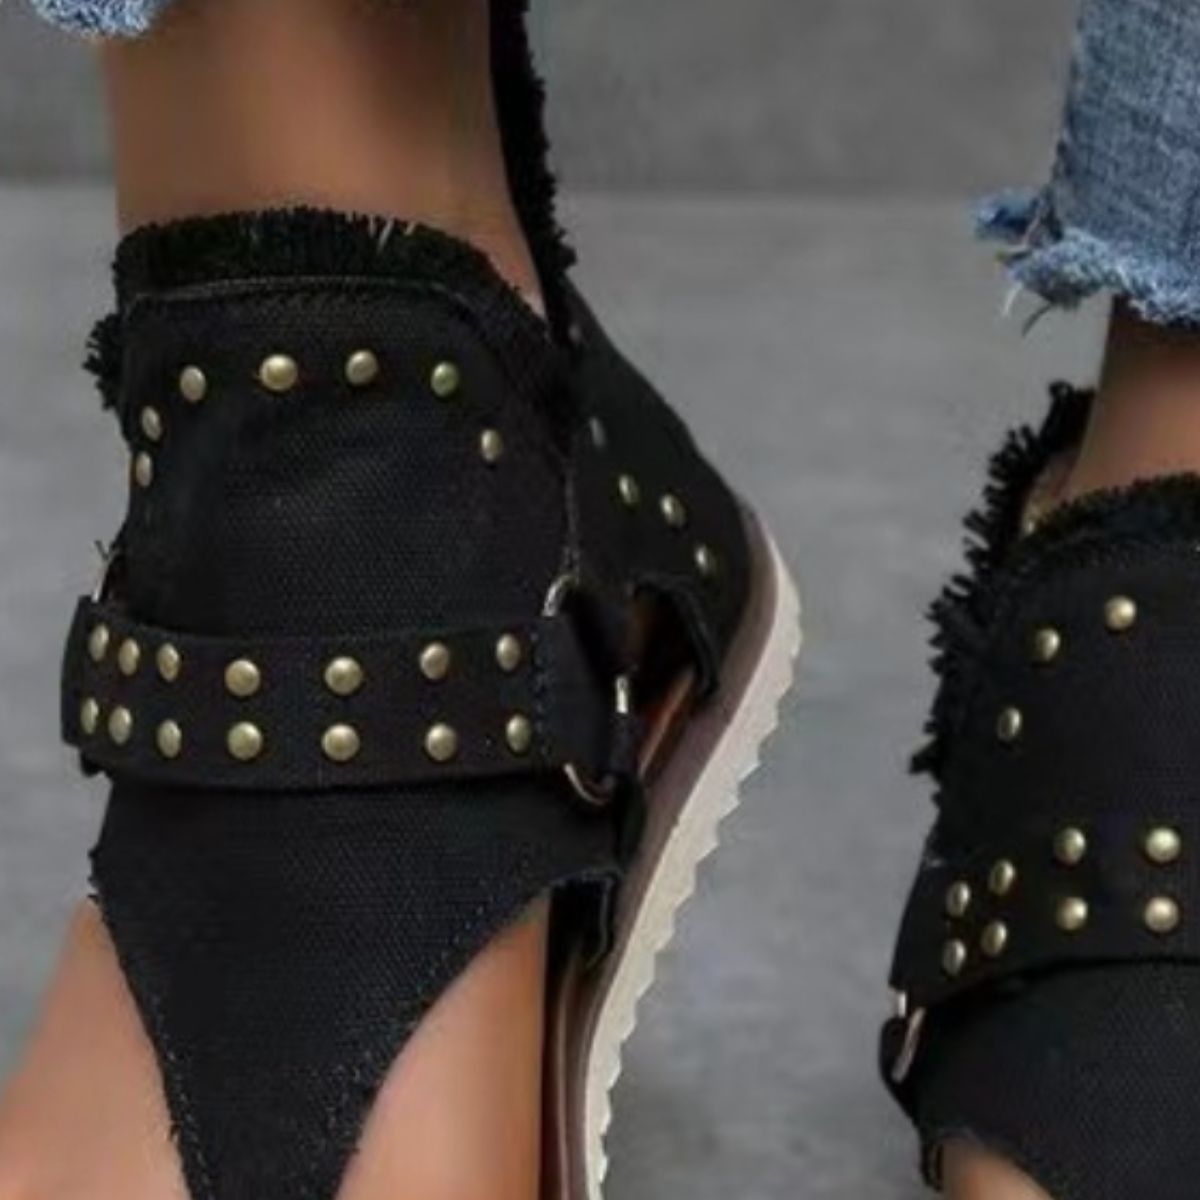 Studded Raw Hem Flat Sandals free shipping -Oh Em Gee Boutique